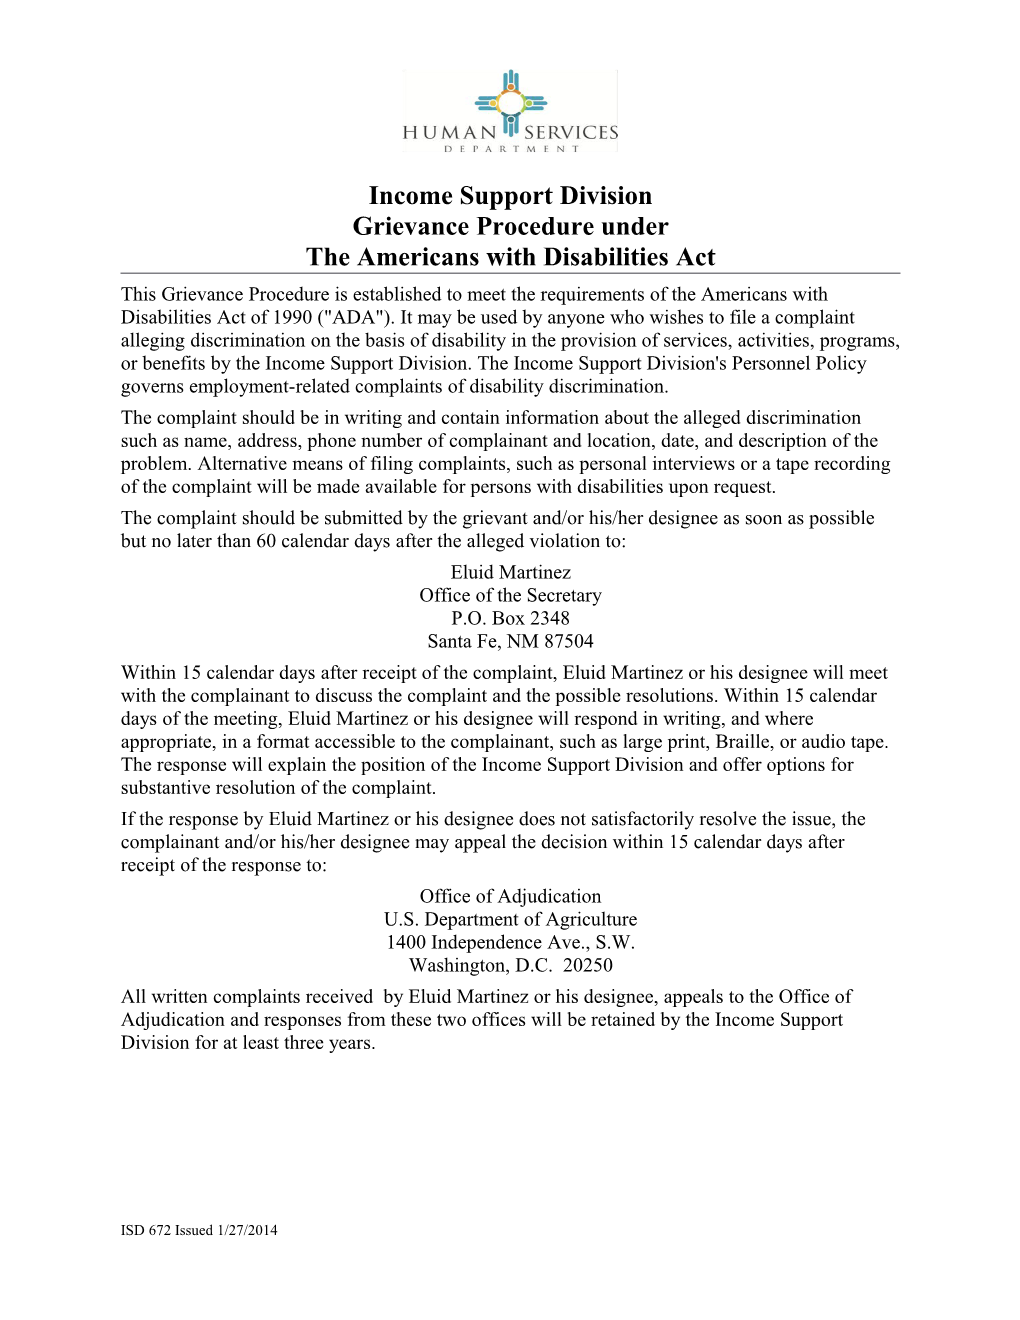 Income Support Division Grievance Procedure Under the Americans with Disabilities Act